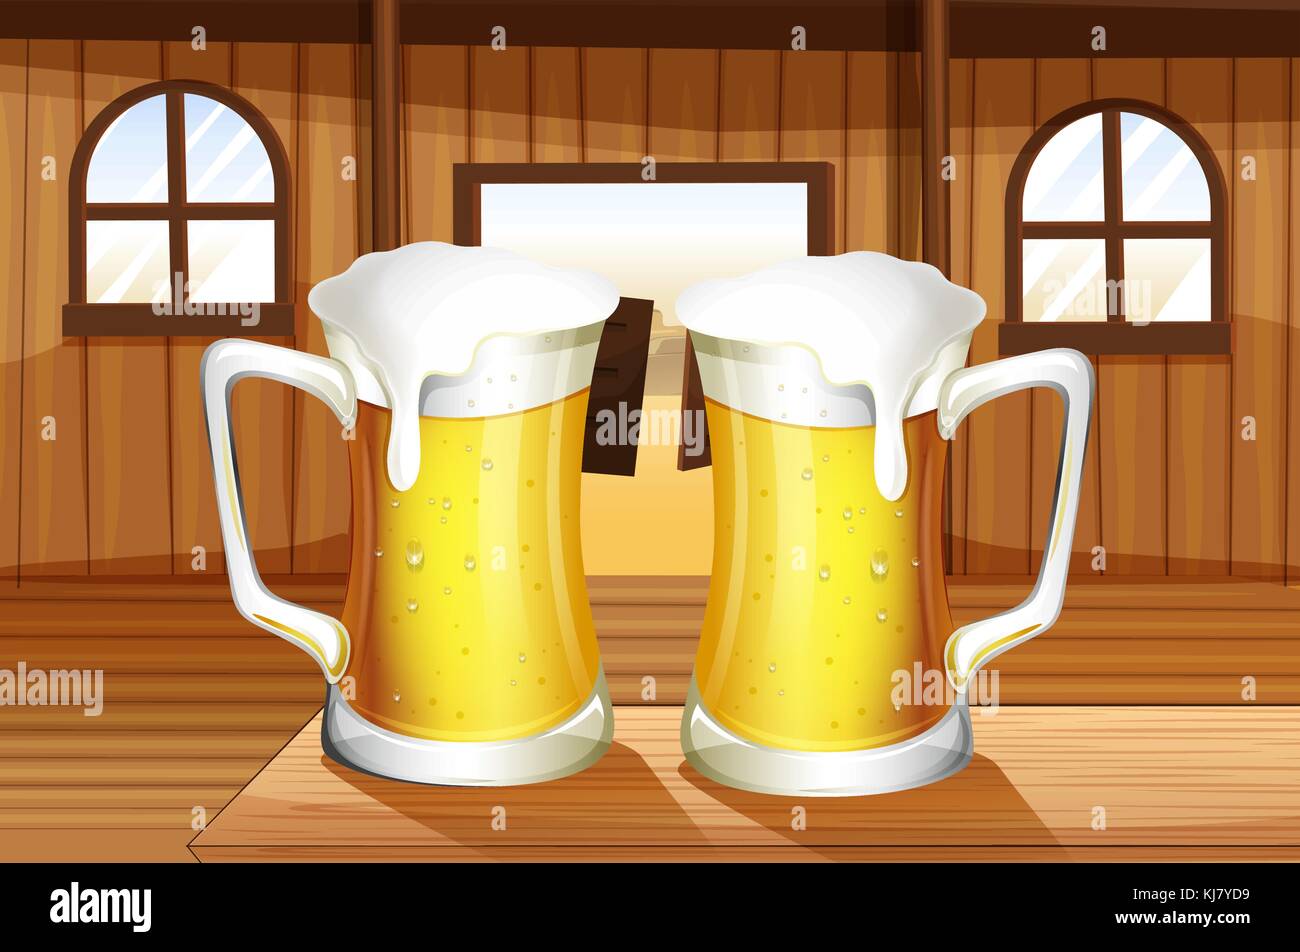 Illustration of a table with two mugs of beer Stock Vector